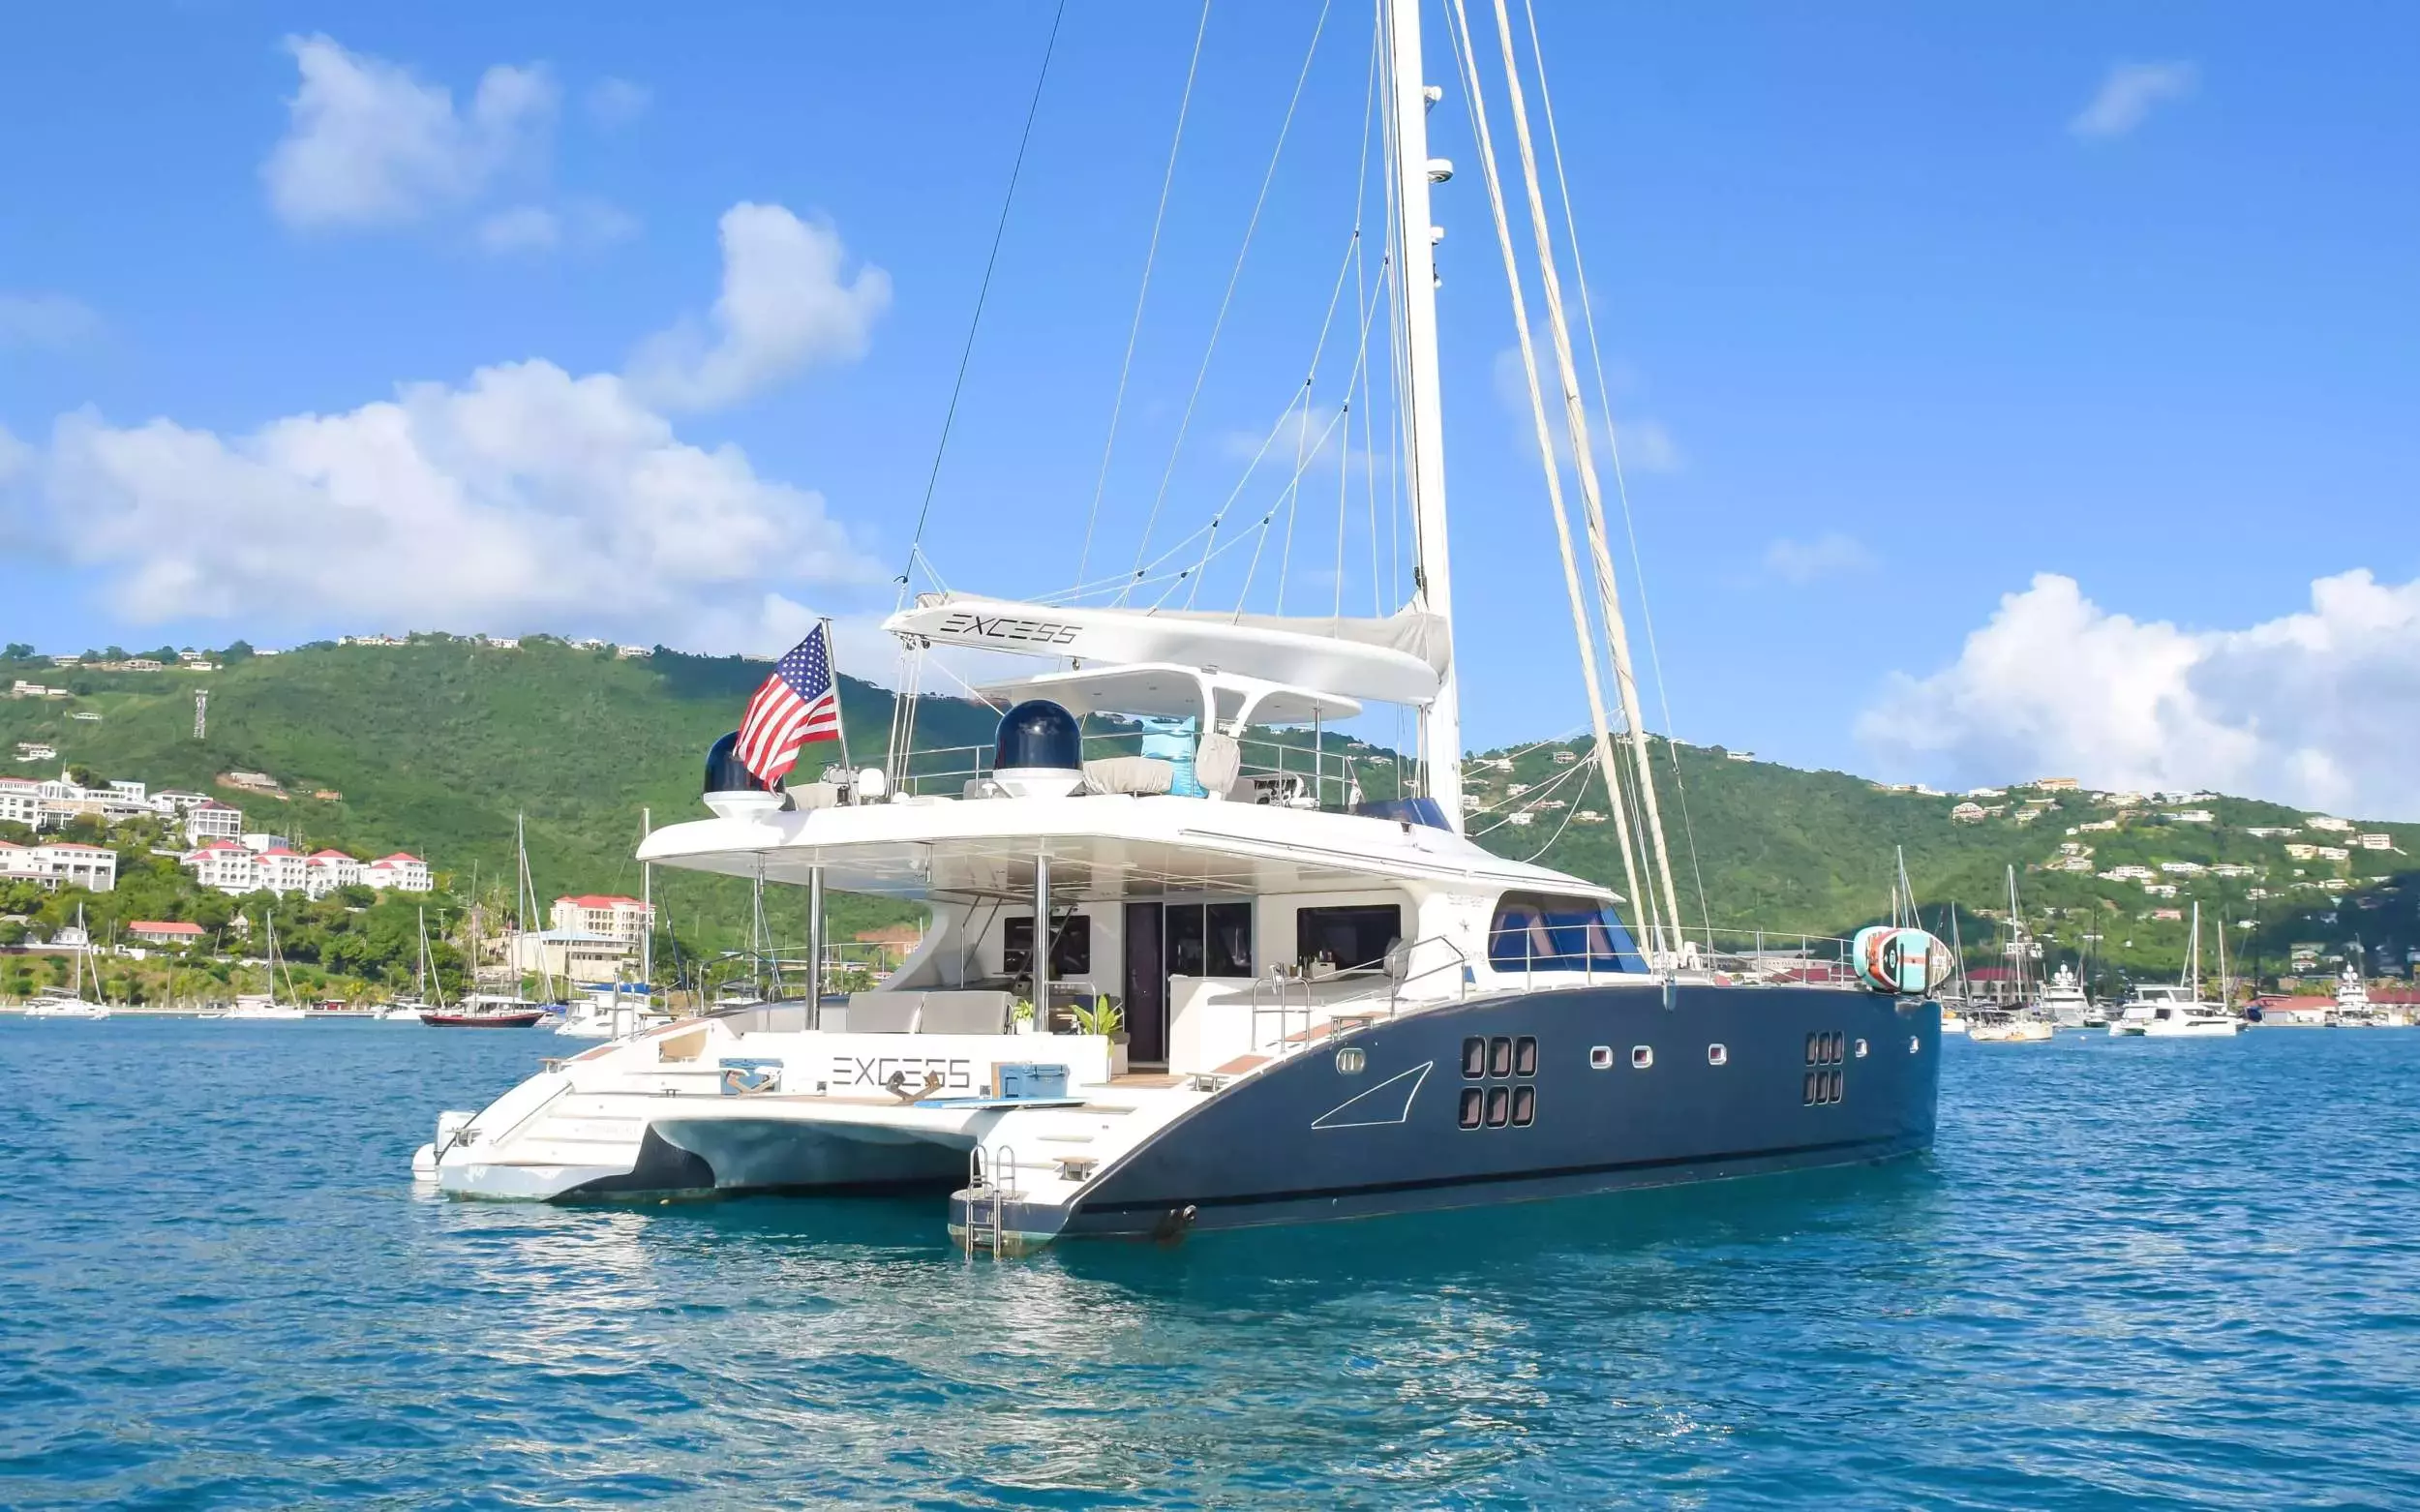 Excess by Sunreef Yachts - Special Offer for a private Luxury Catamaran Rental in Tortola with a crew